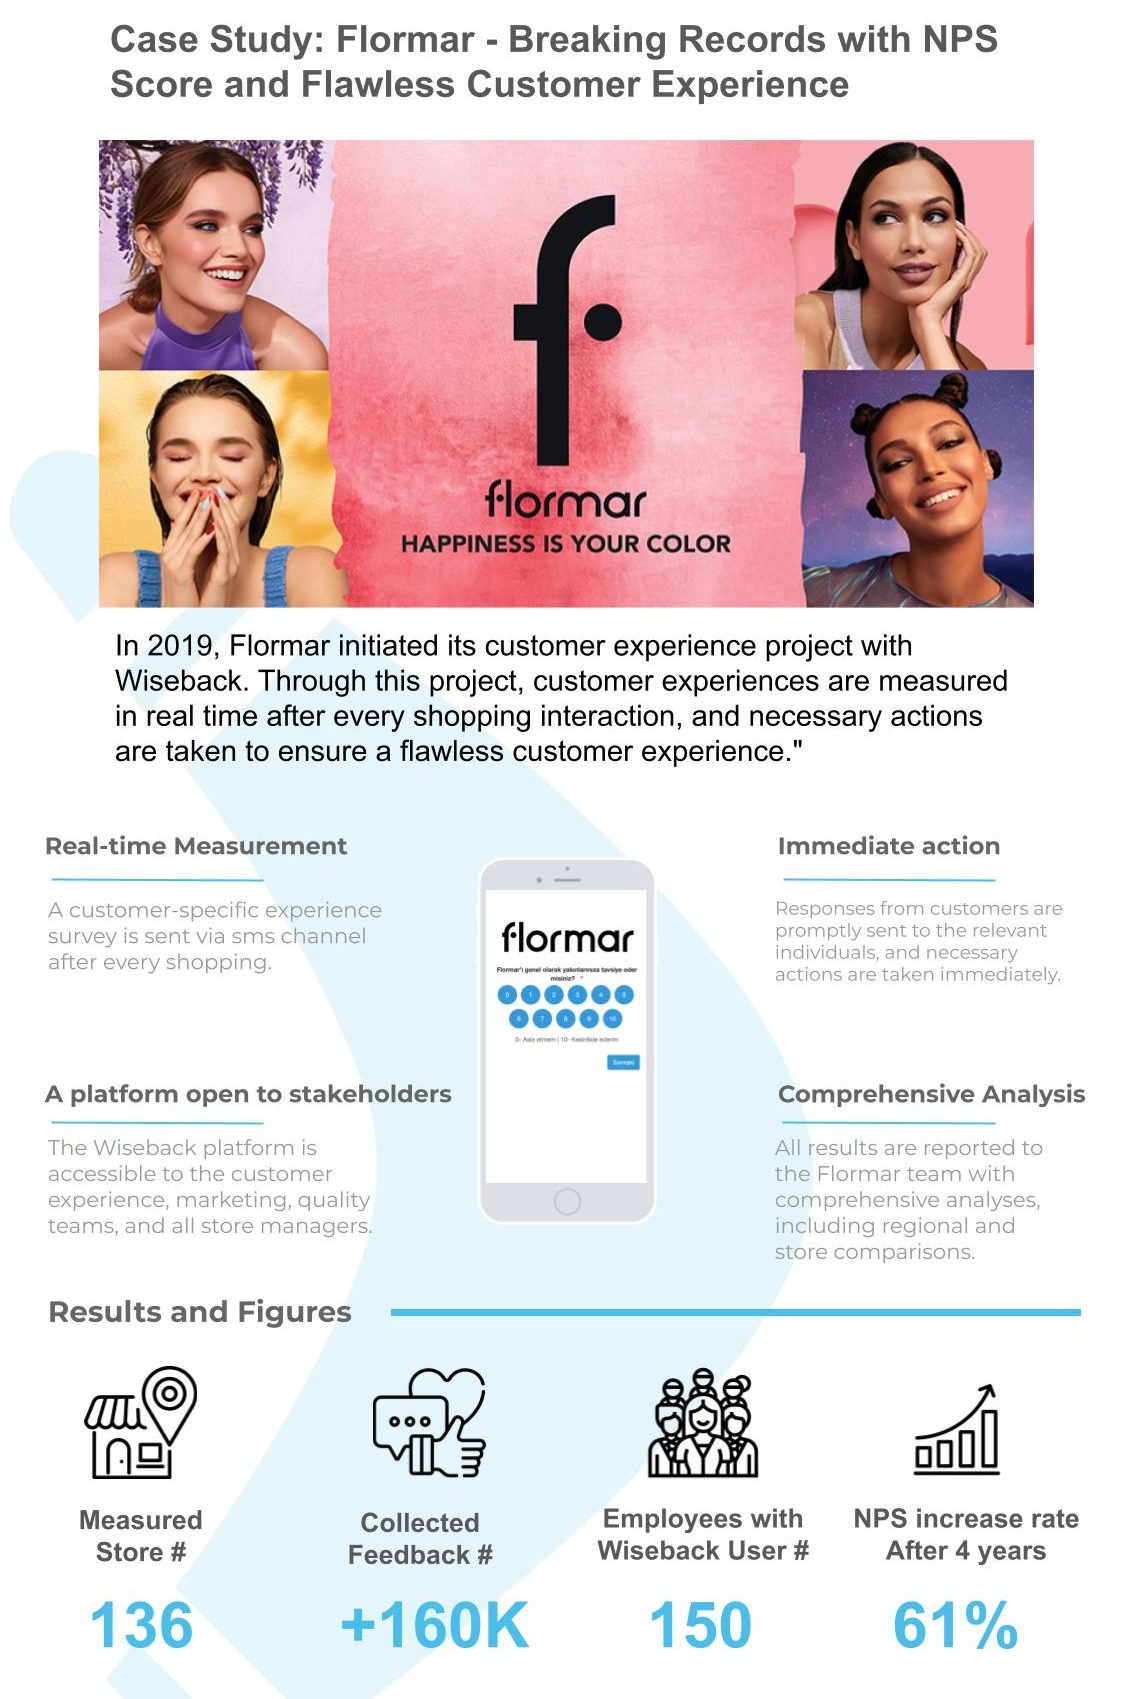 Case Study: Flormar - Breaking Records with NPS Score and Flawless